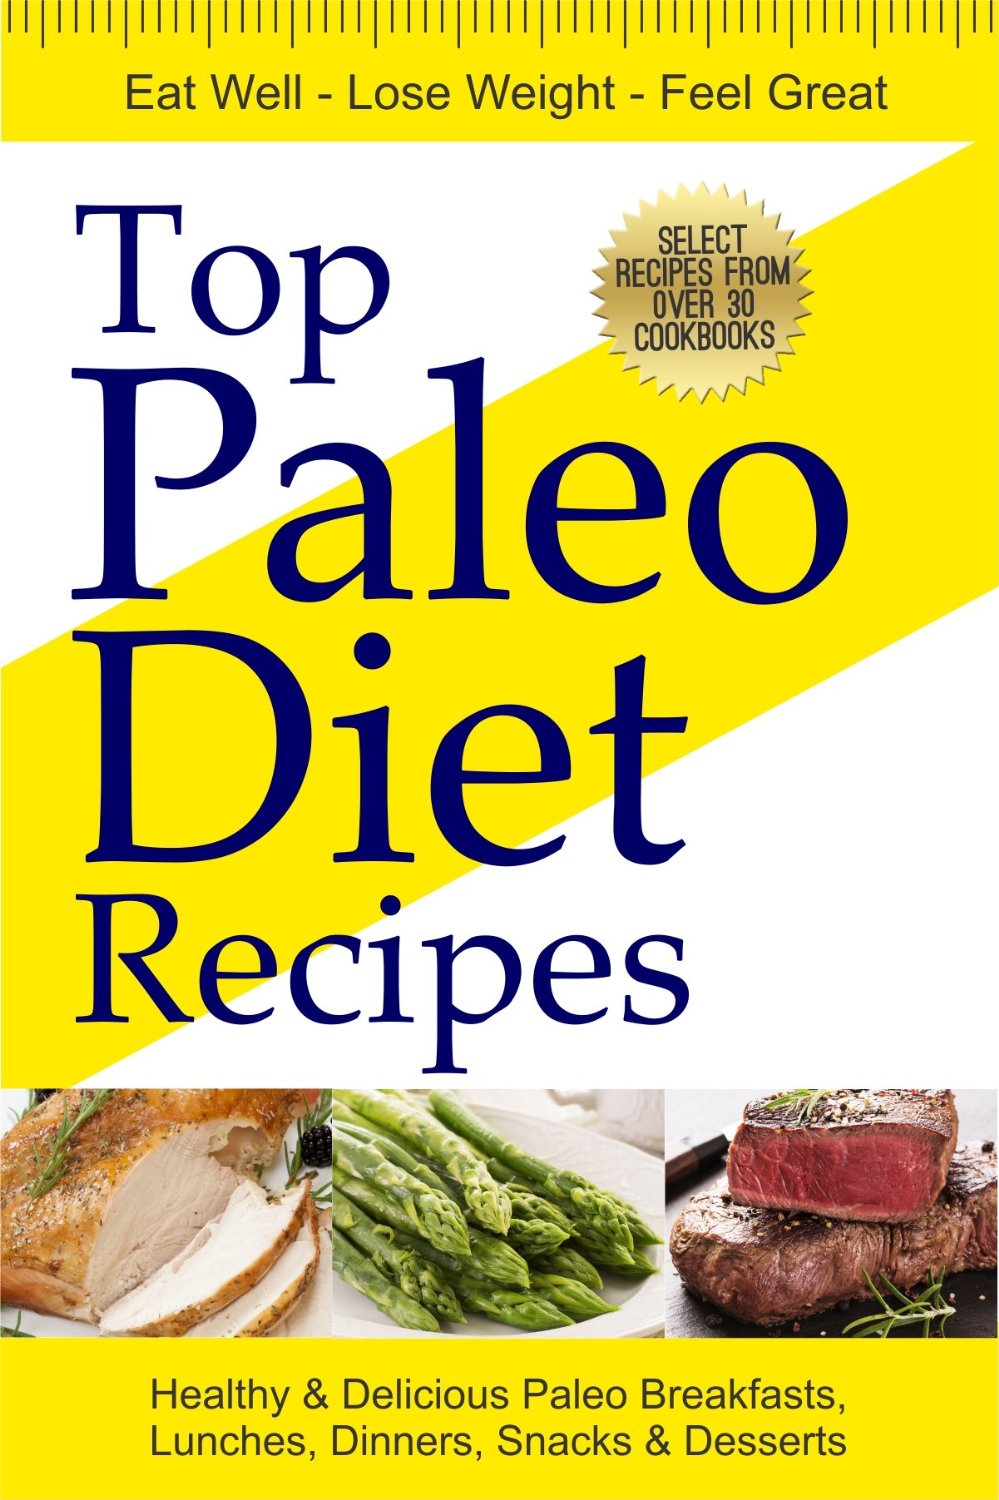 Top Paleo Diet Recipes: 44 Healthy & Delicious Paleo Breakfasts, Lunches, Dinners, Snacks & Desserts by Bob Frothingham